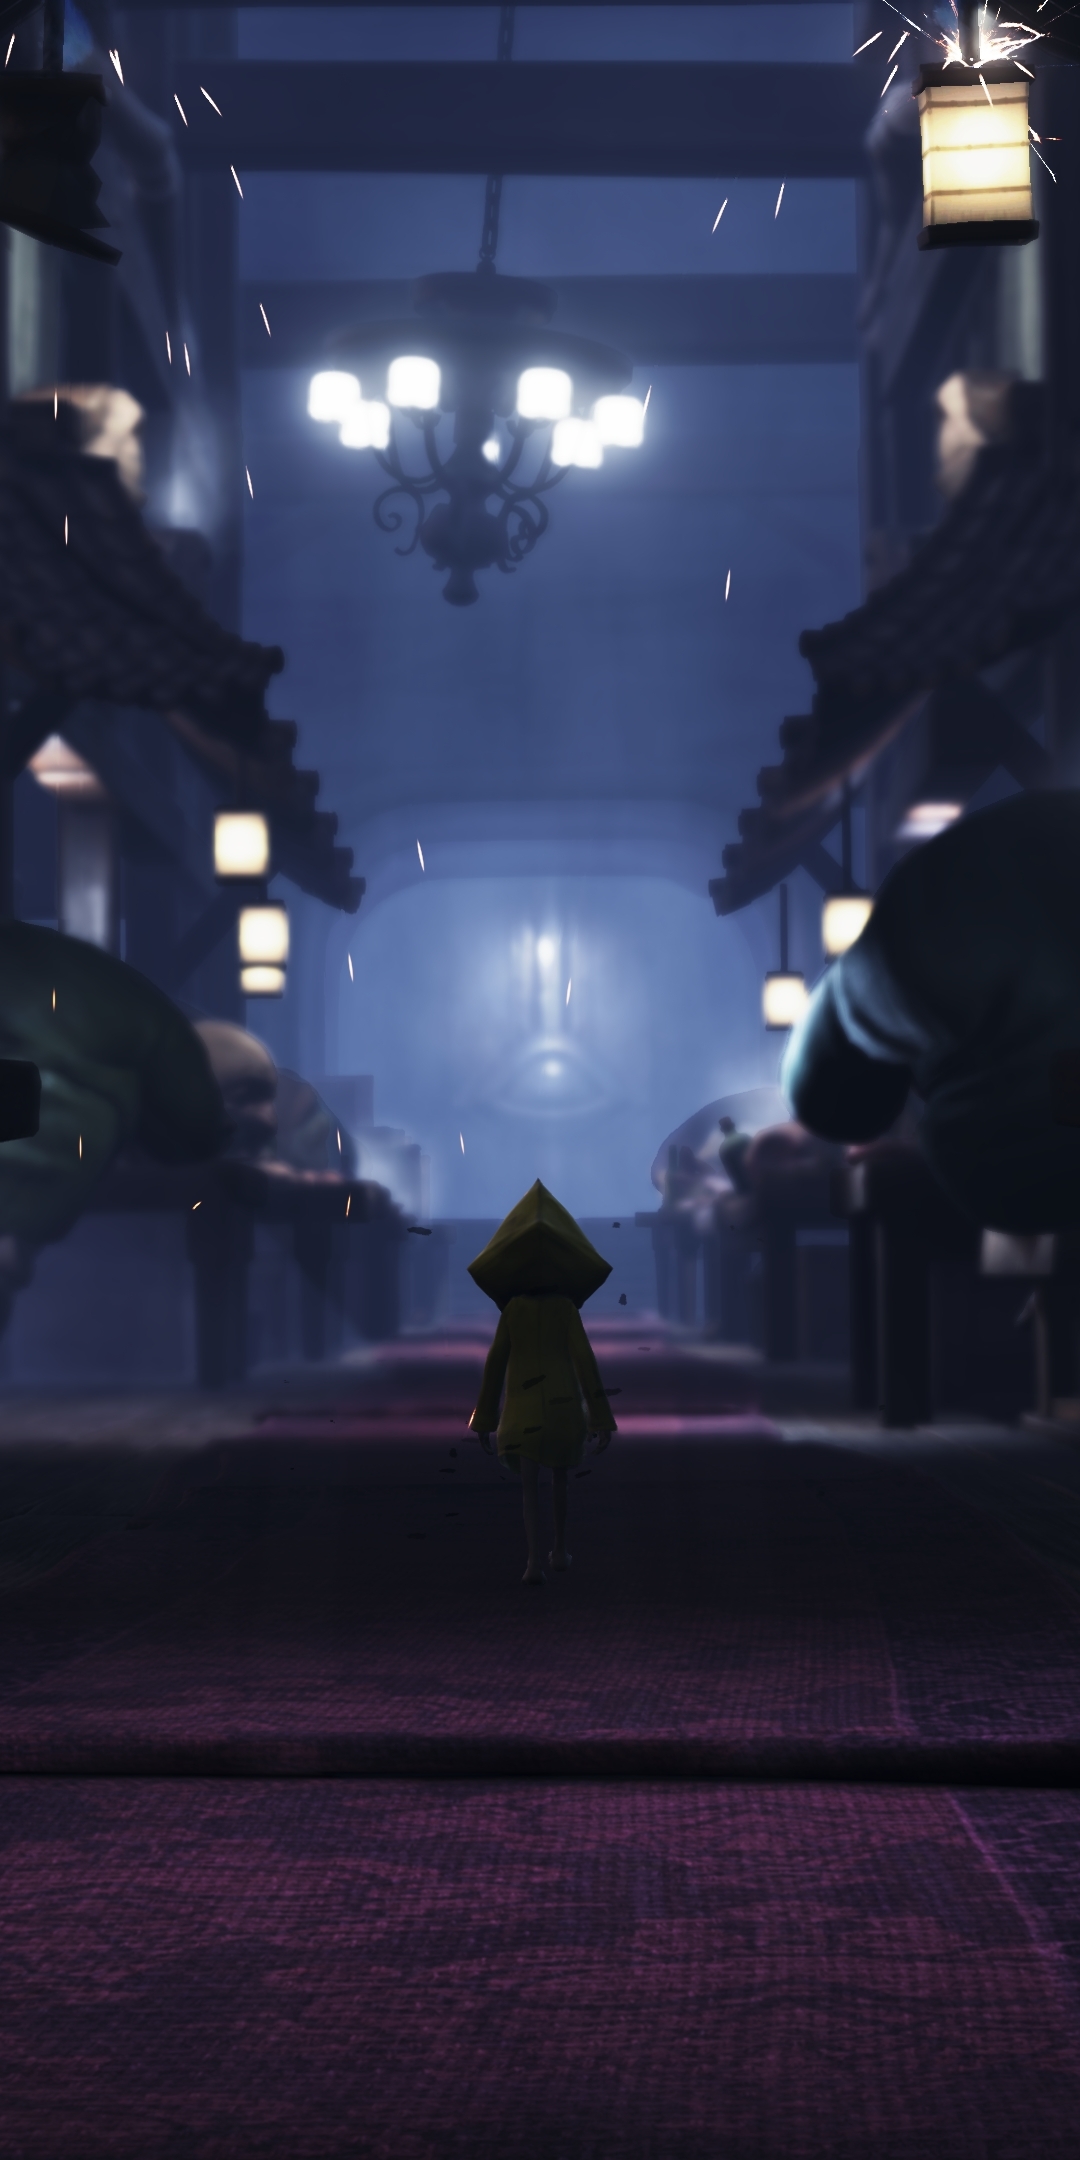 Little Nightmares Mobile Review & Gameplay 60fps Android & iOS, Adventure